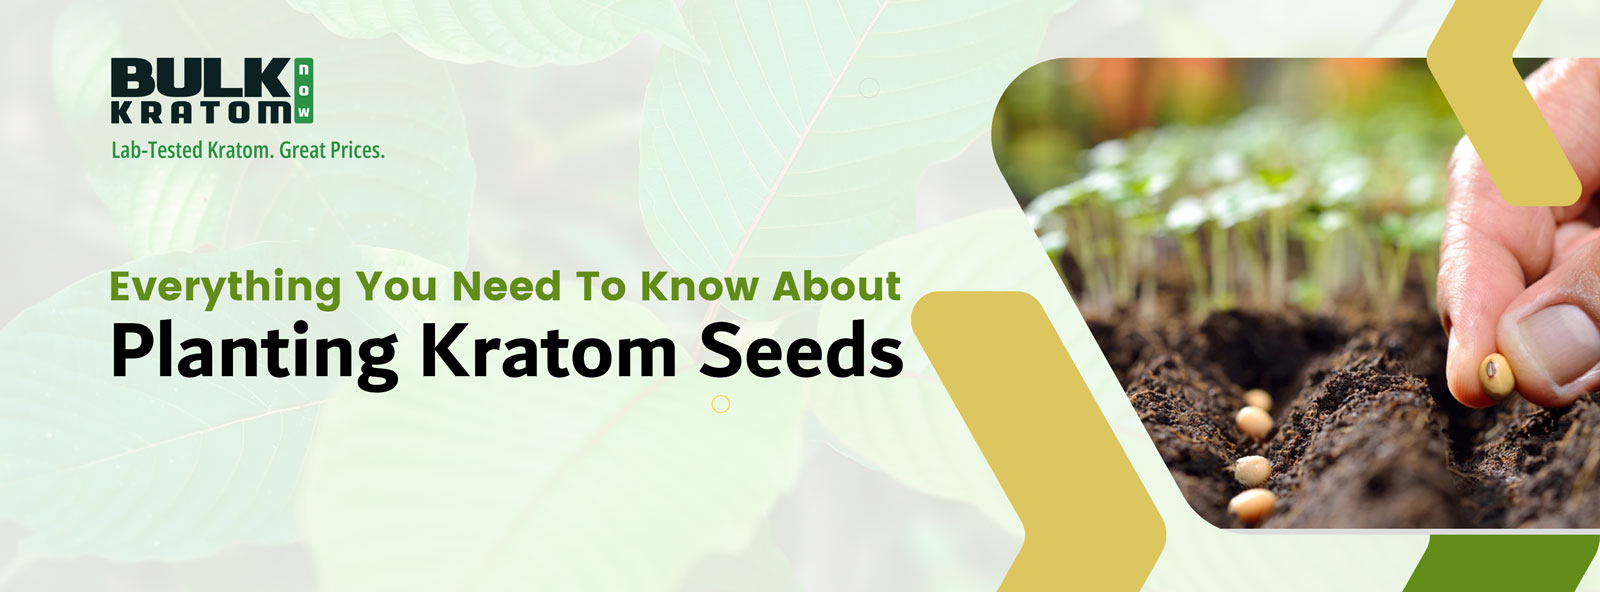 Everything You Need to Know About Planting Kratom Seeds